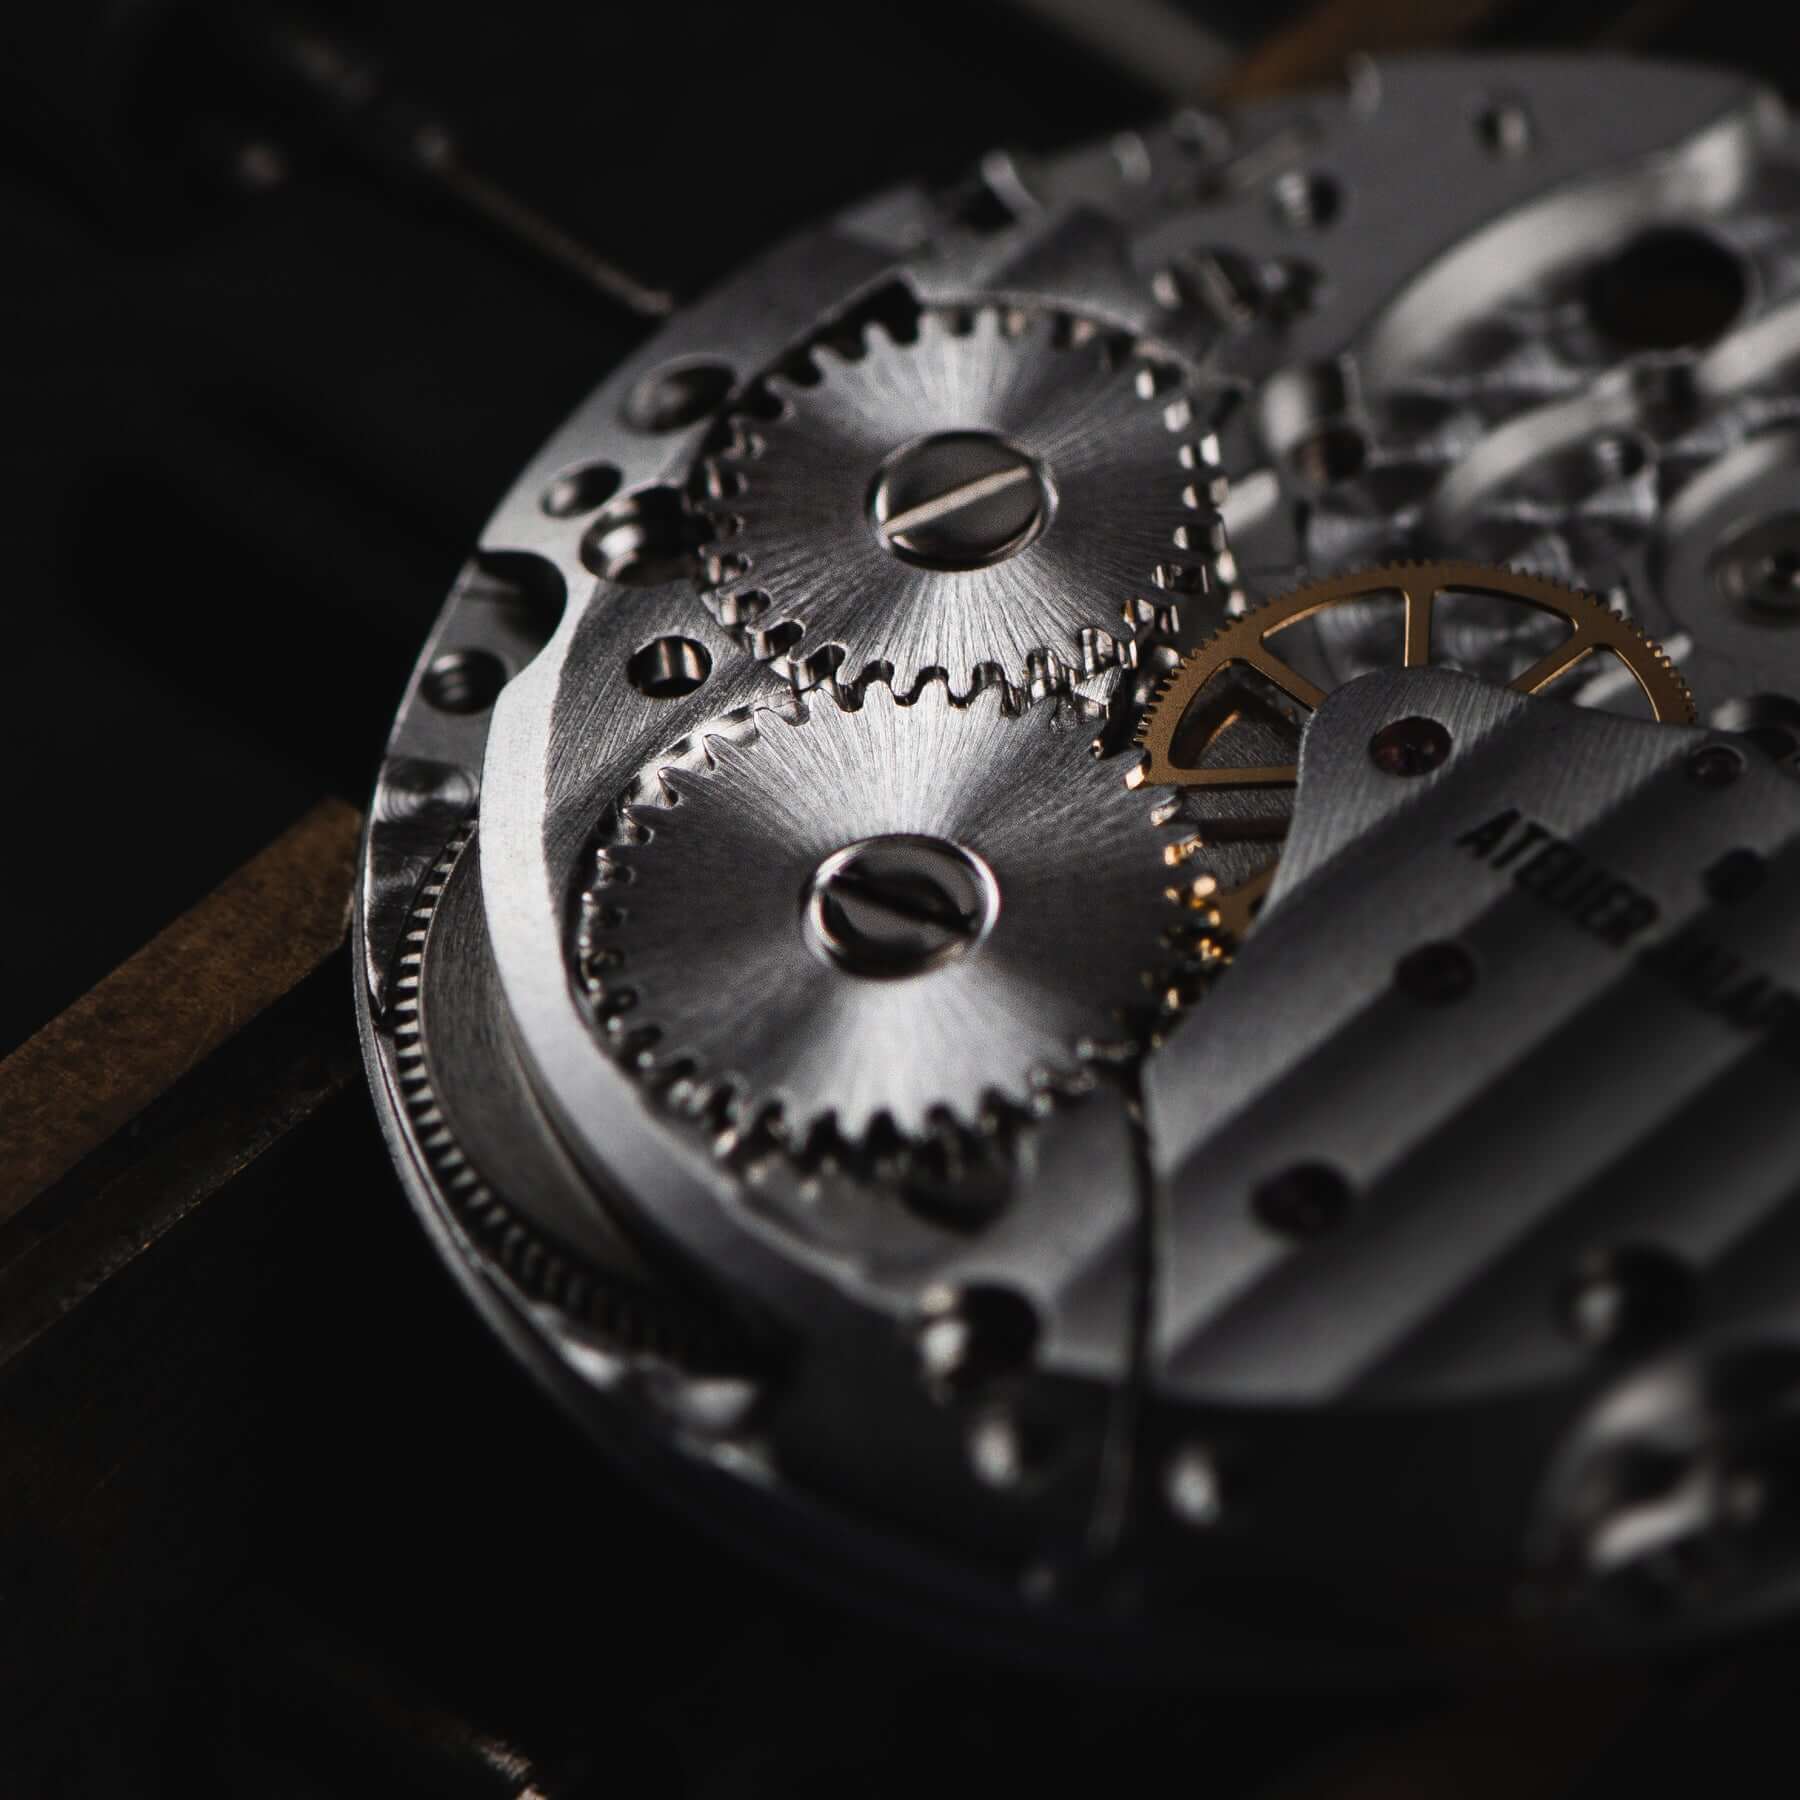 Close-up of an AJ watch movement with its soleillage finish